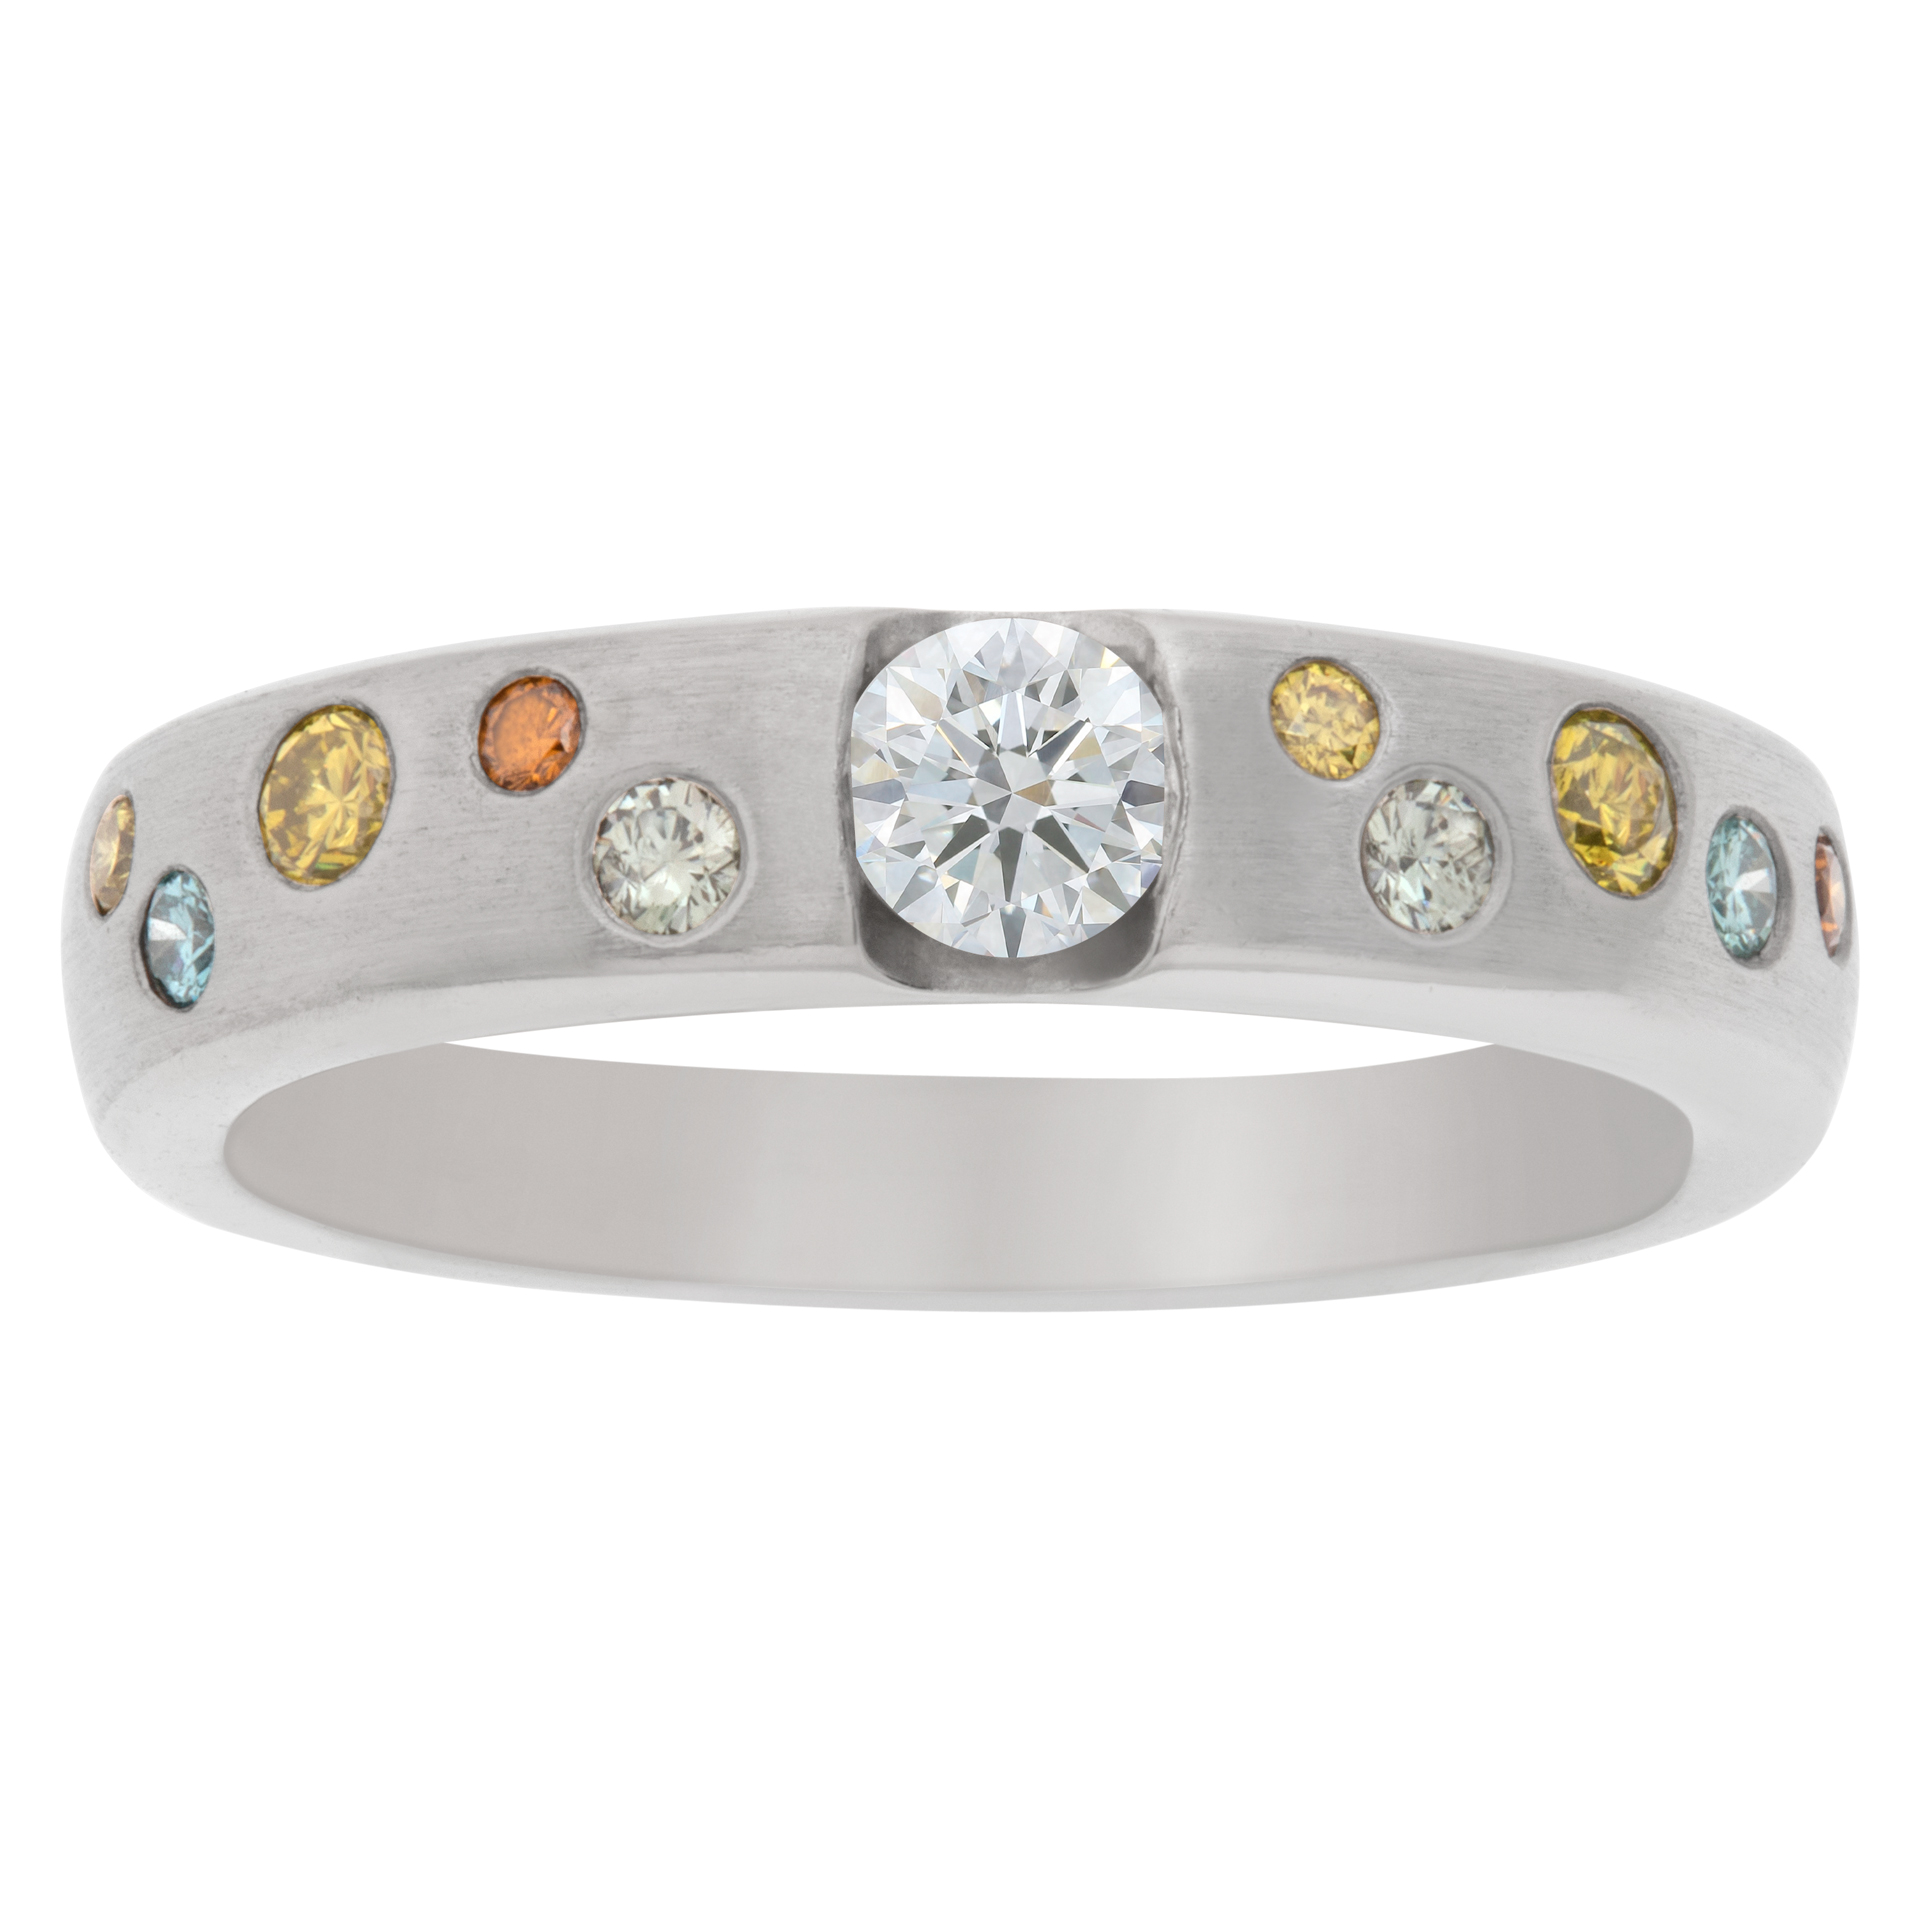 Platinum ring with center diamond and colorful accent stones size 6.5